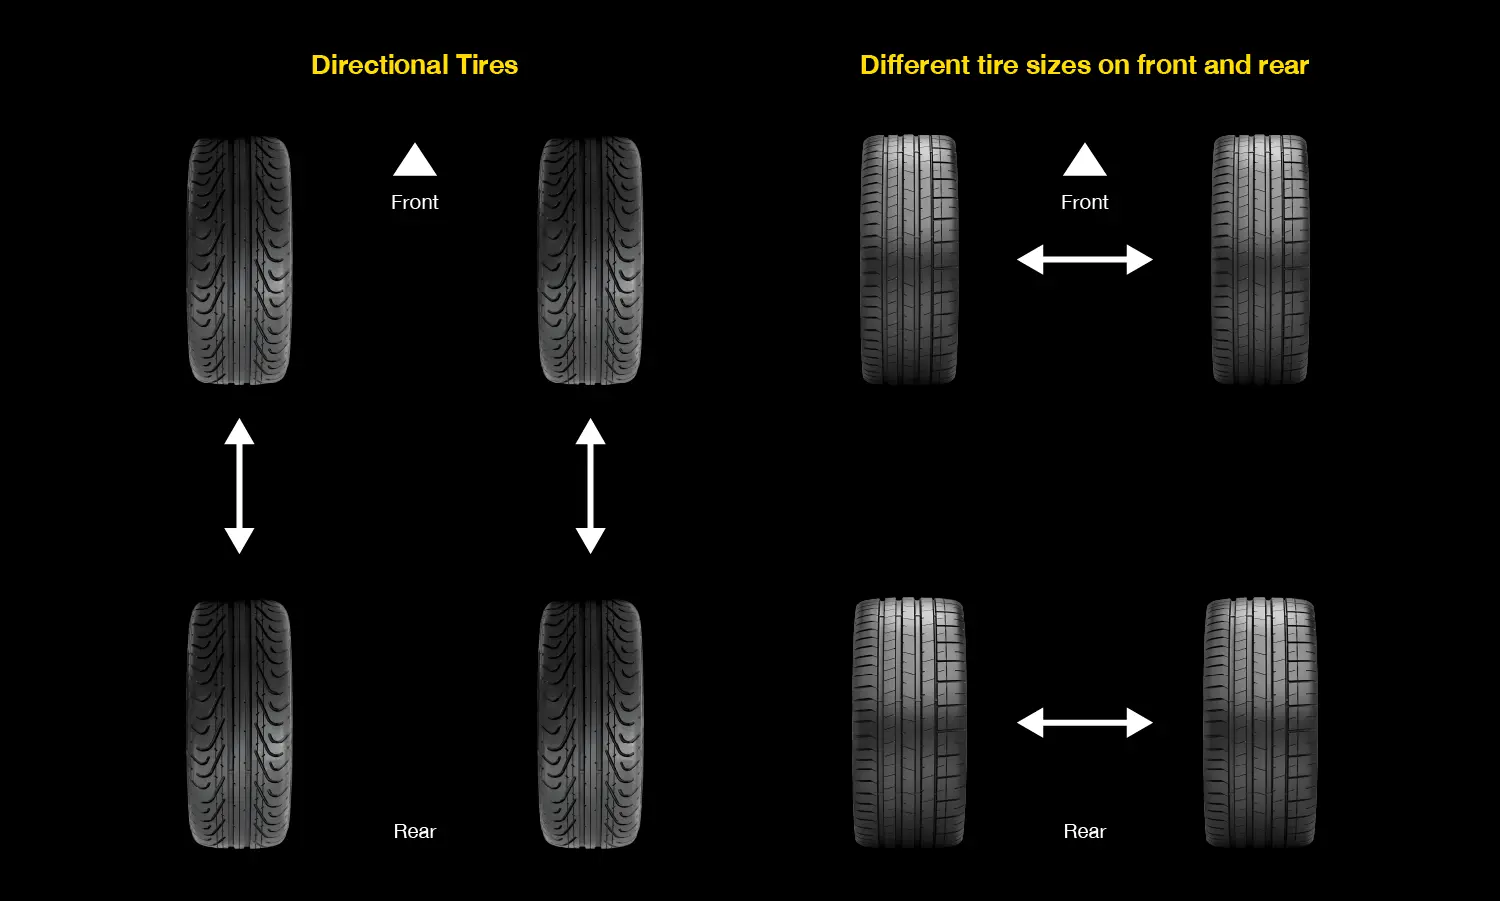 directional, different tire sizes on the front and rear tire rotation patterns